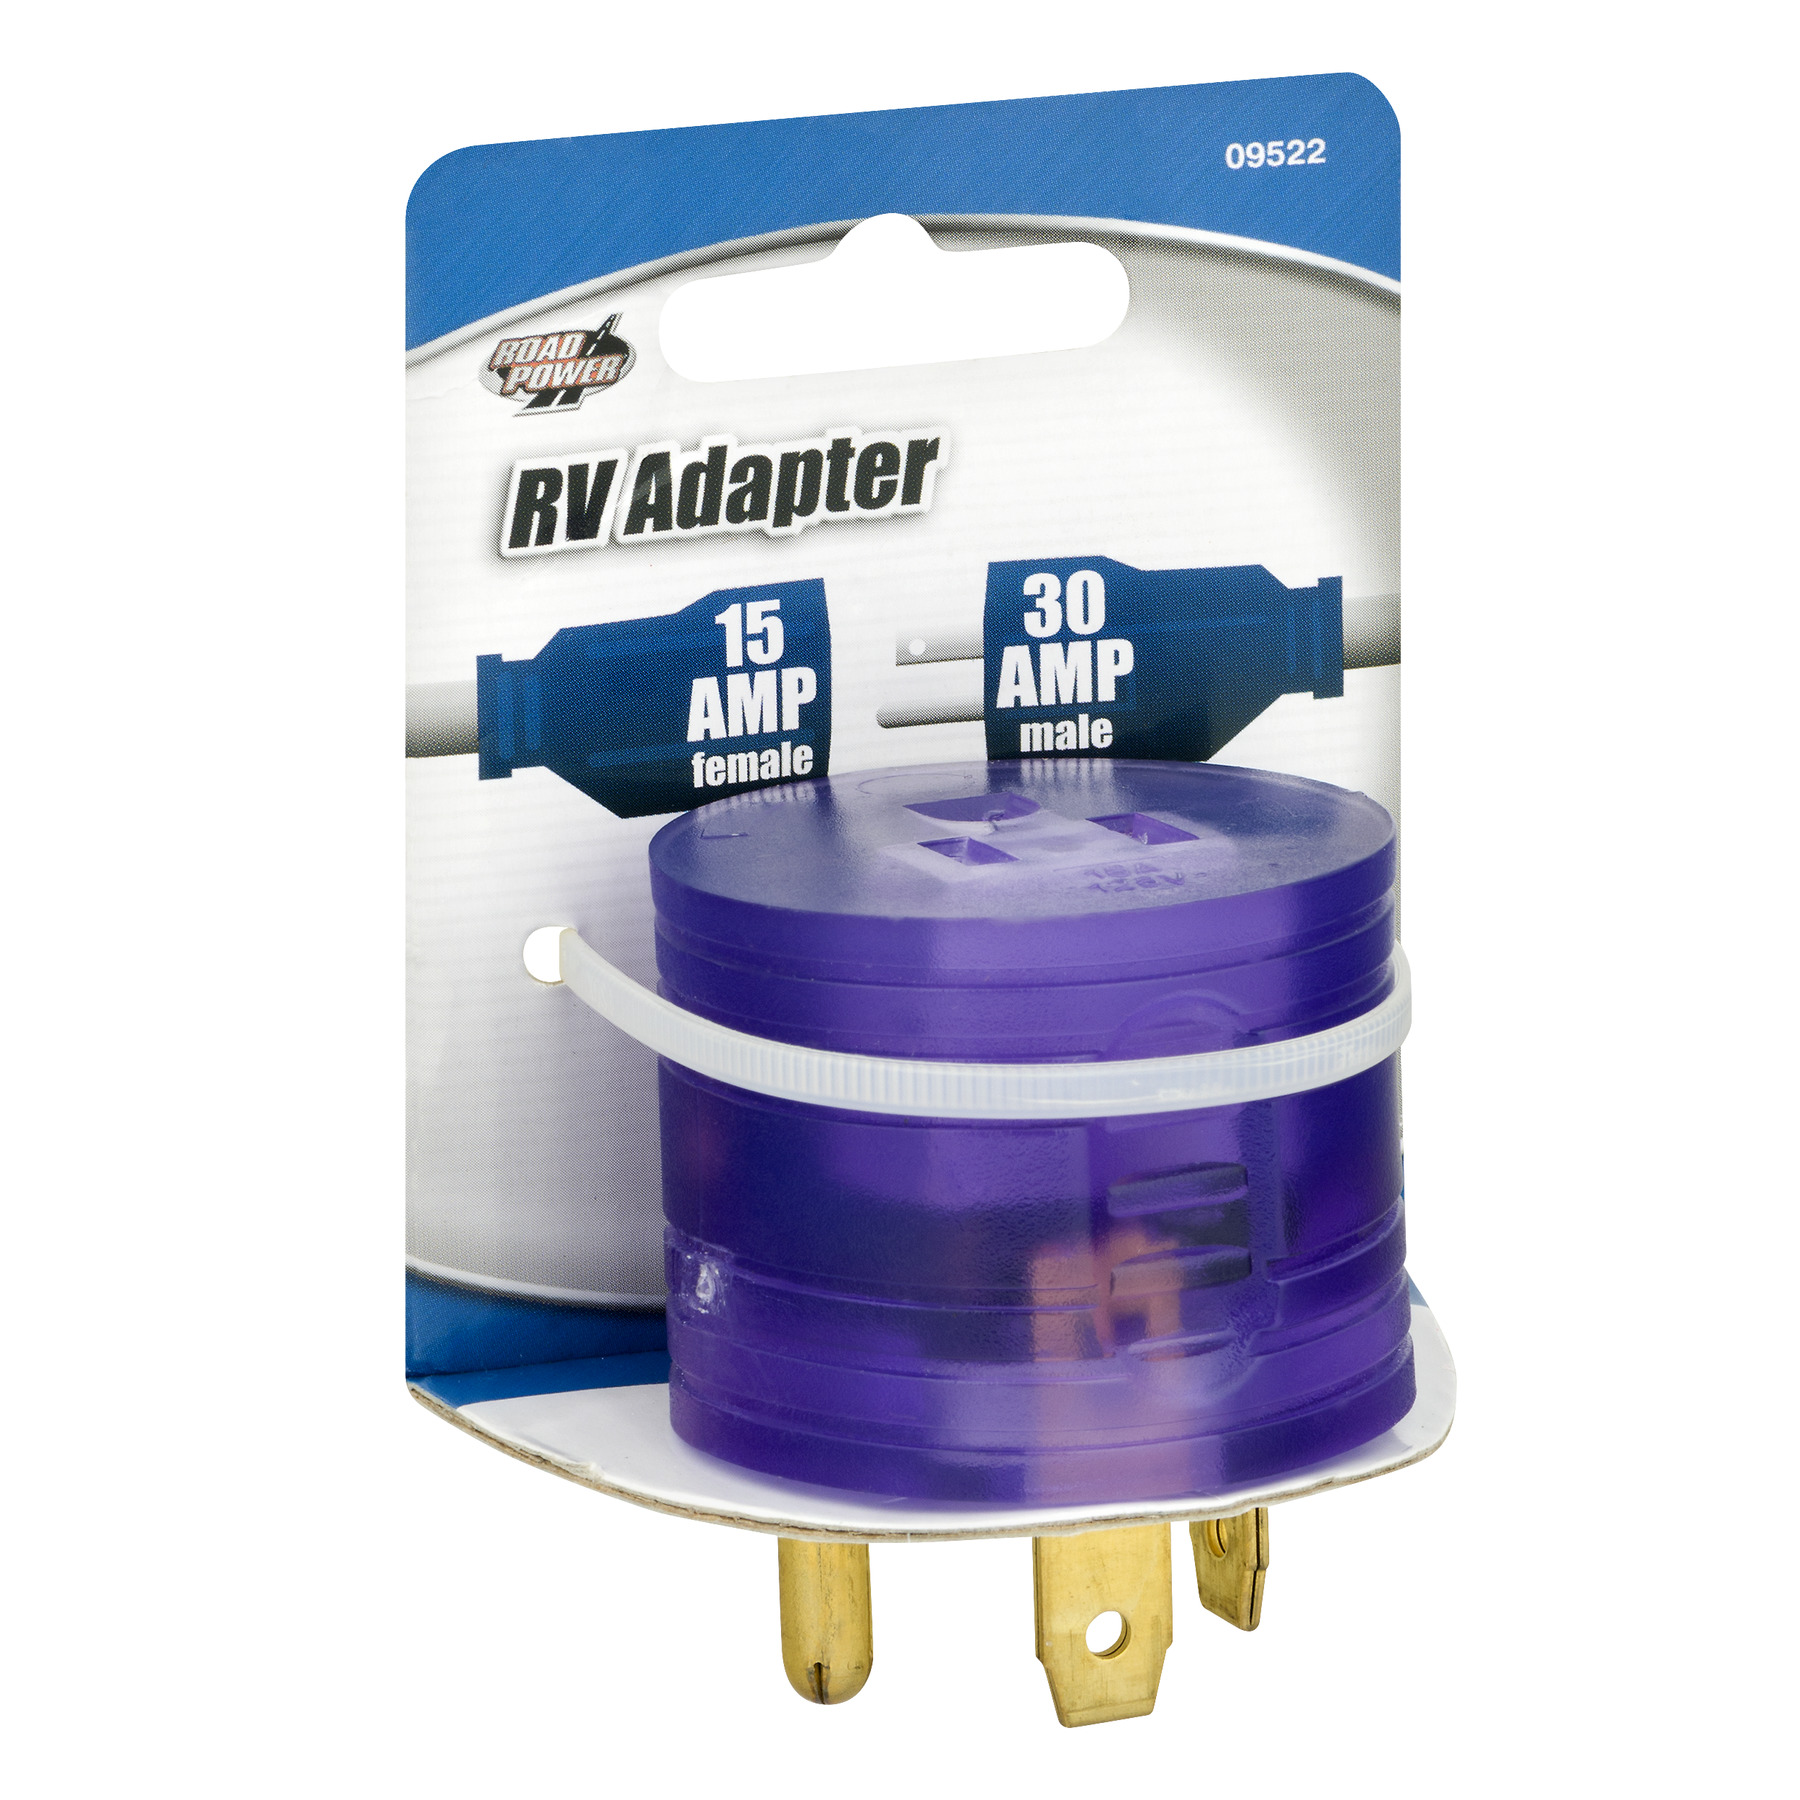 Road Power 30-15-Amp RV Power Adapter - image 2 of 5